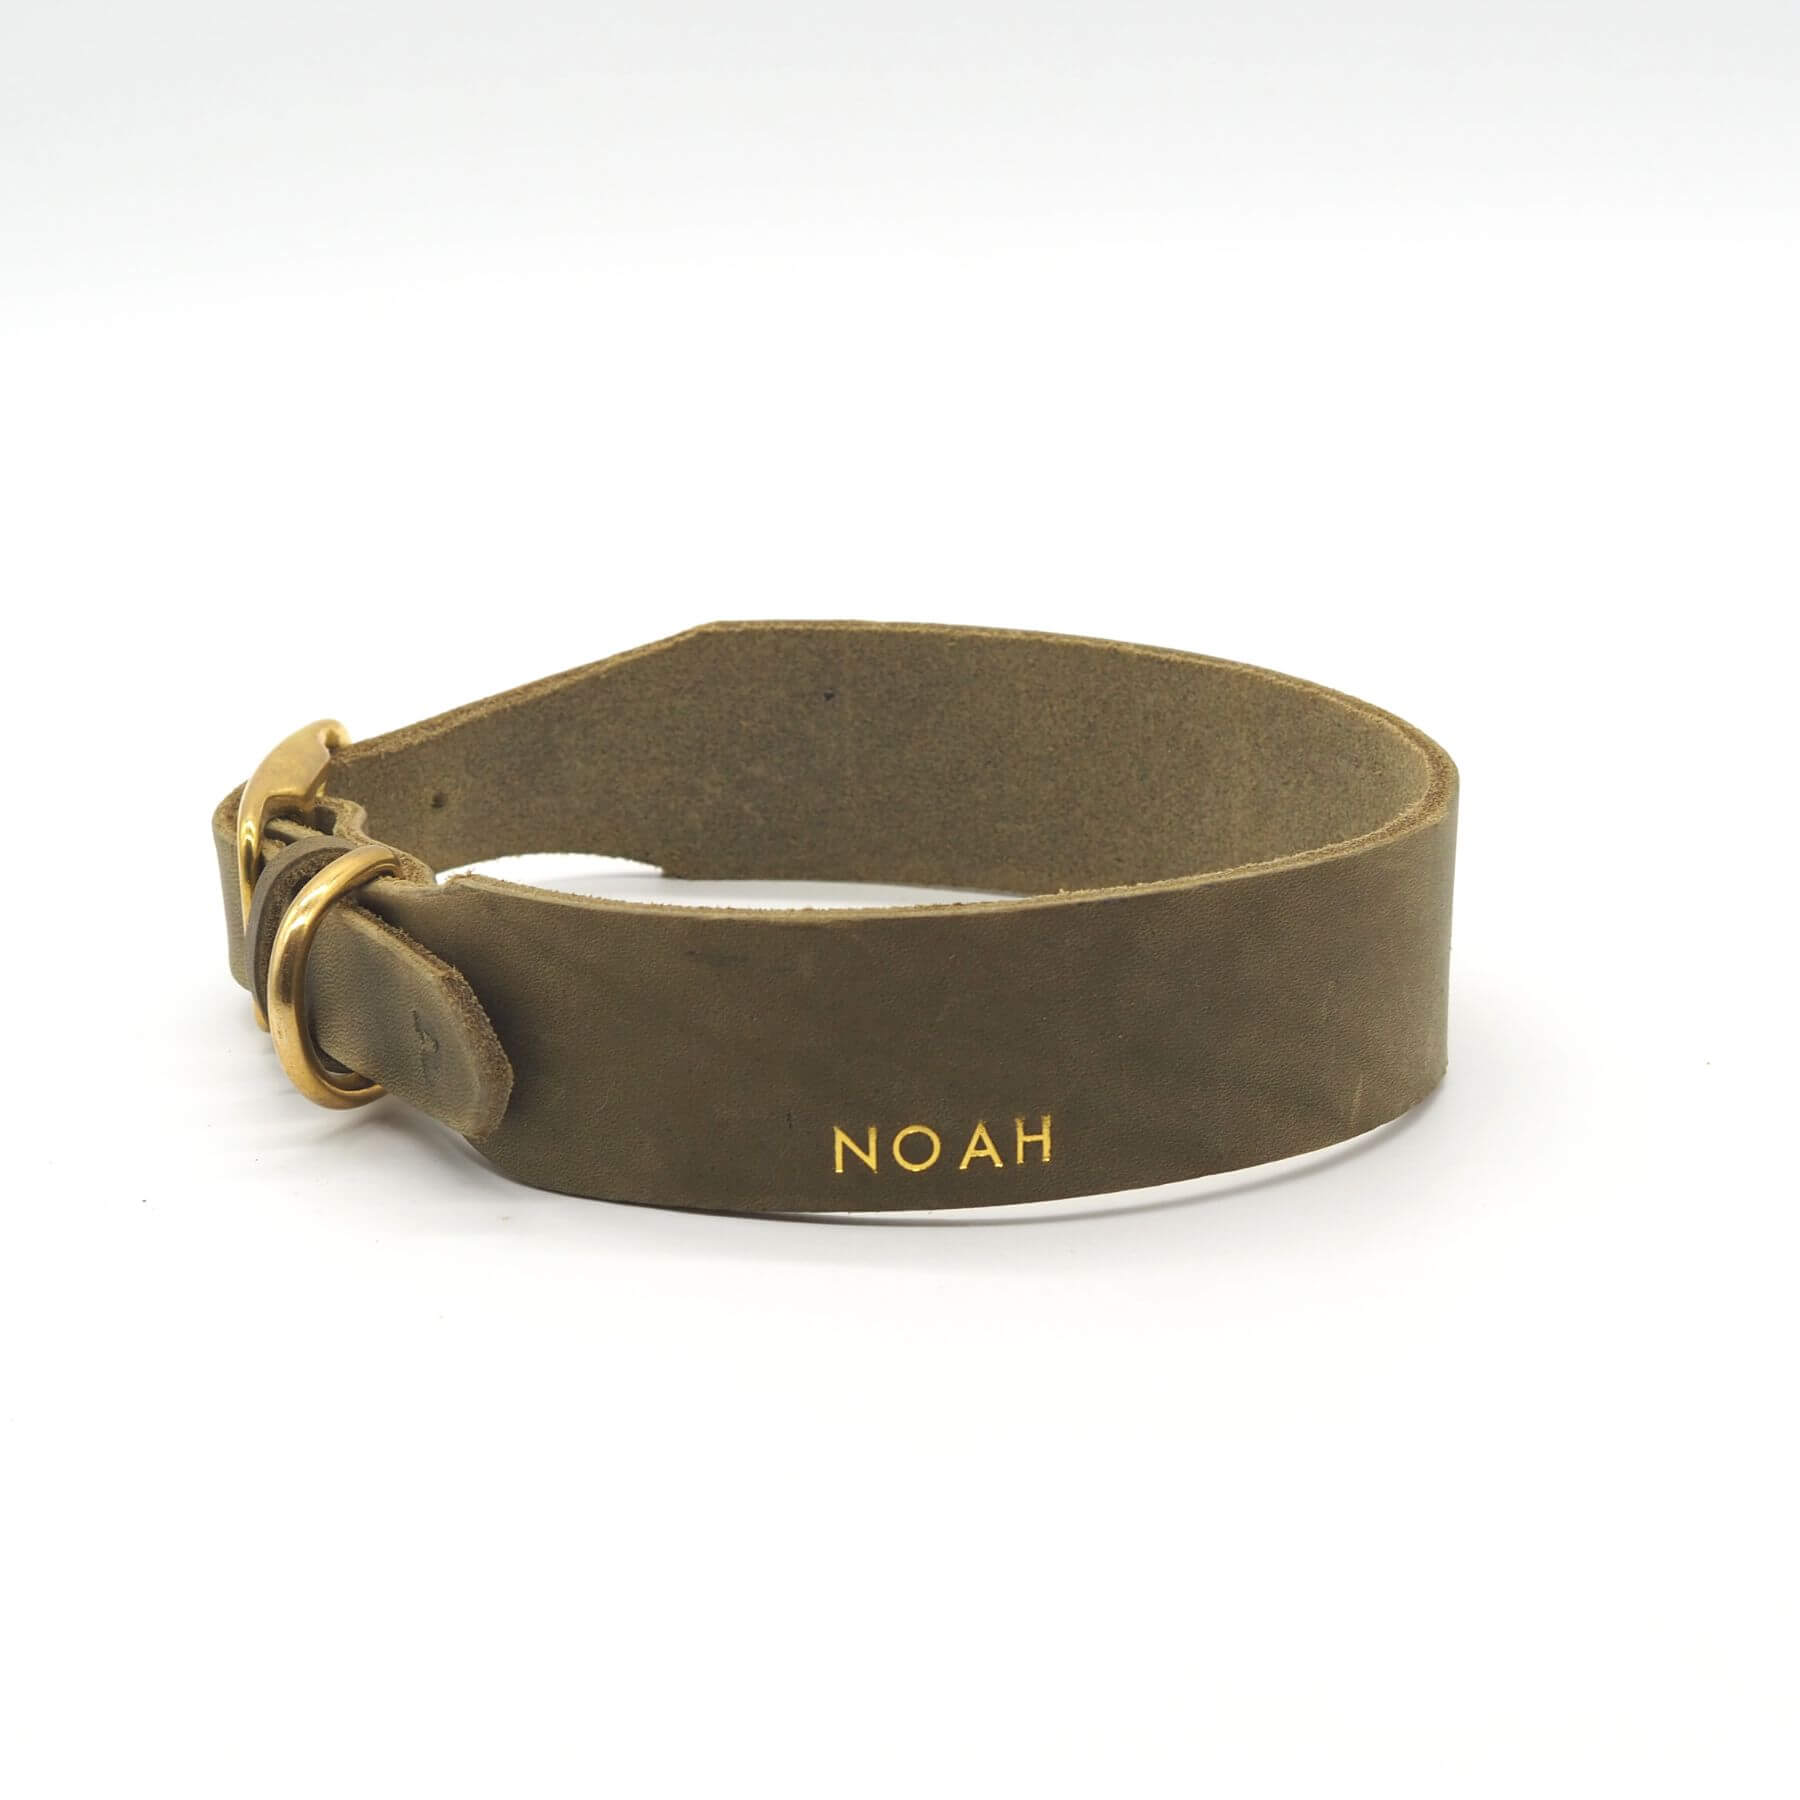 Personalizable collar with name | olive